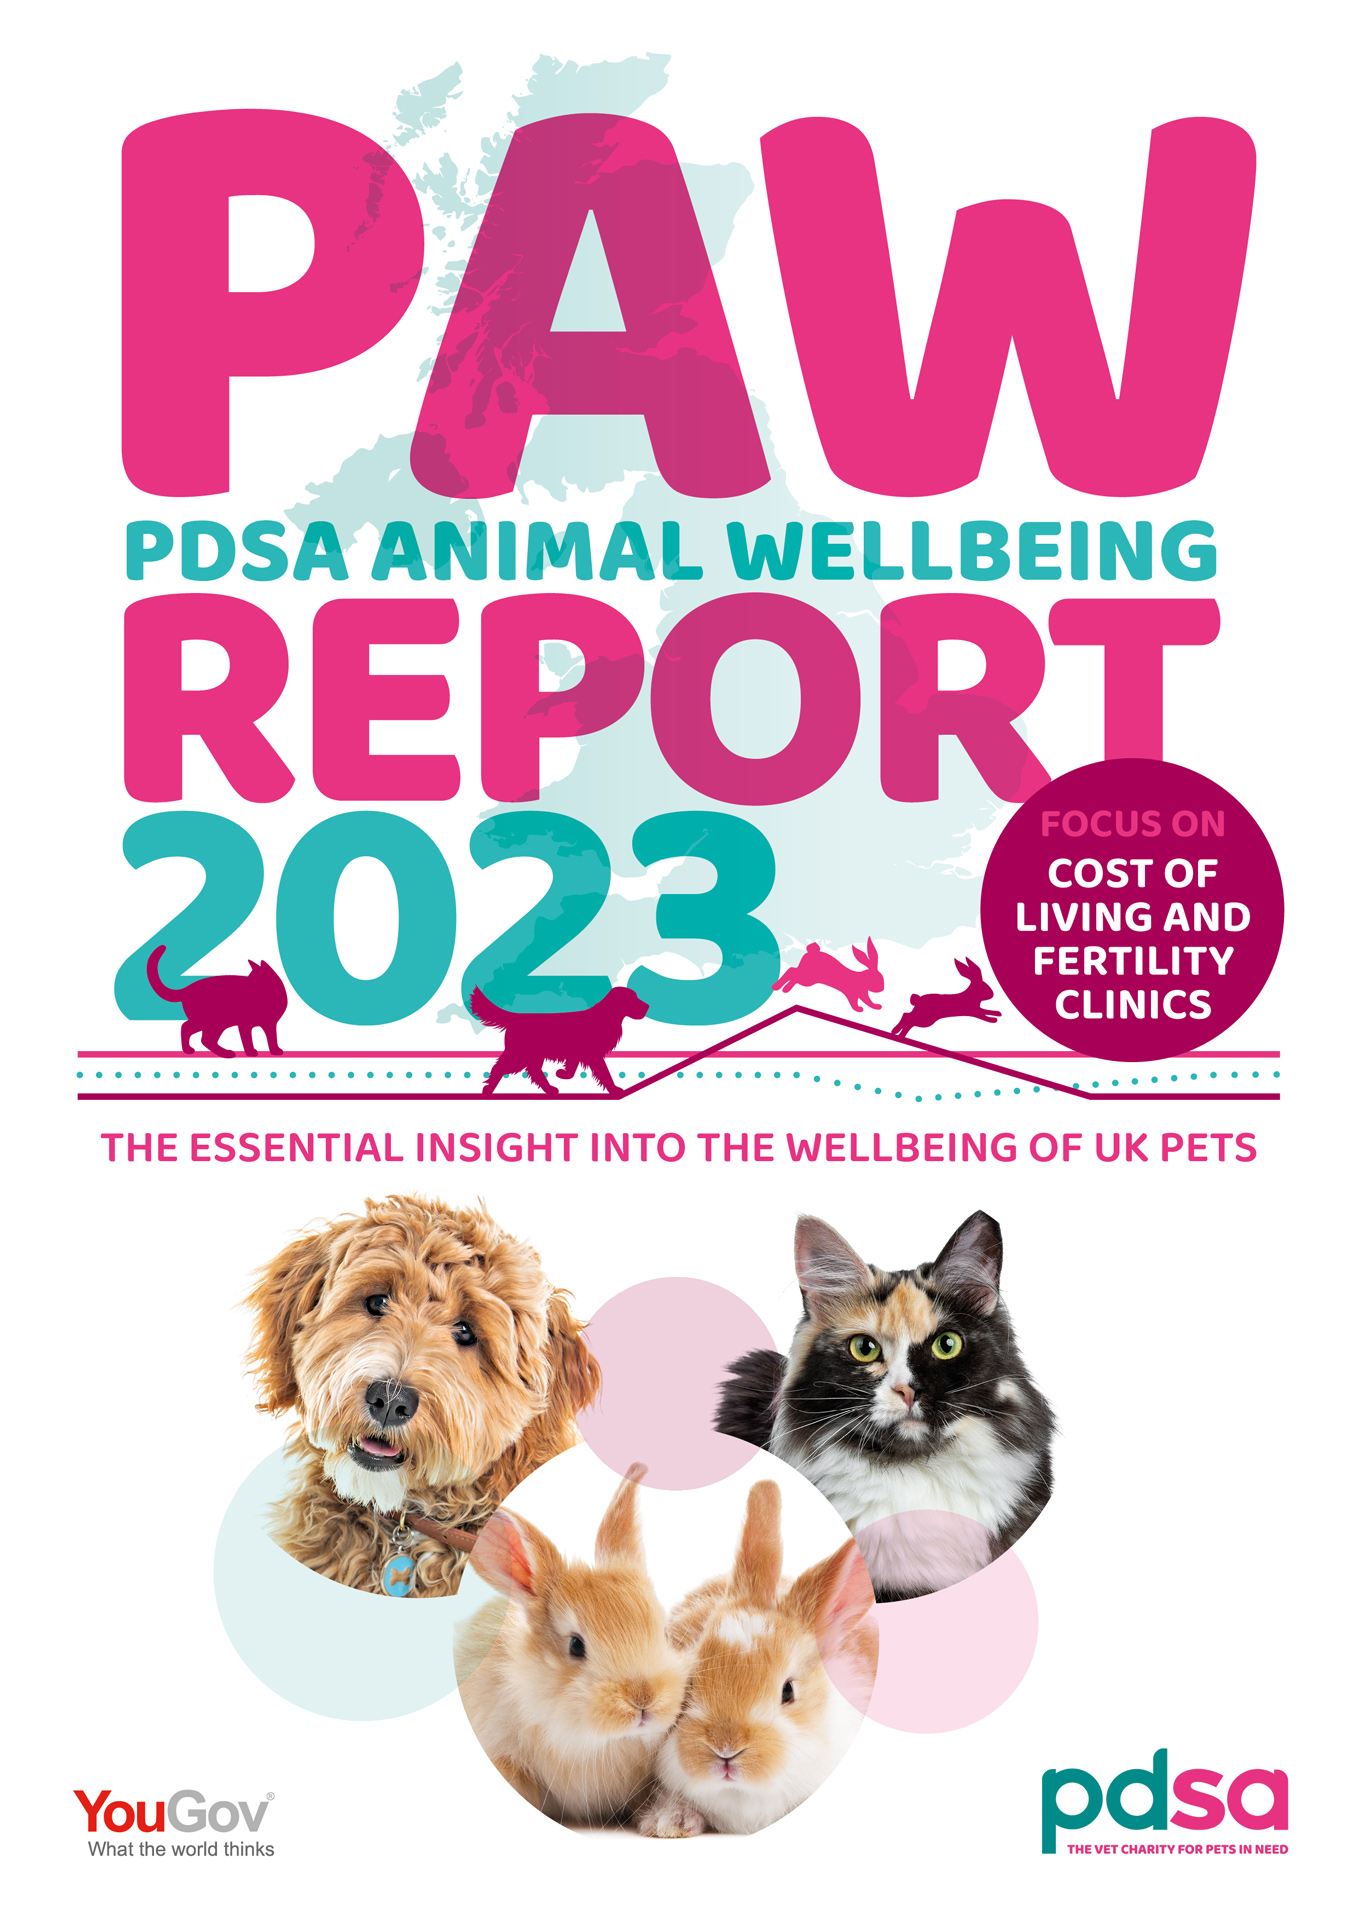 The front cover image of the PAW Report 2023